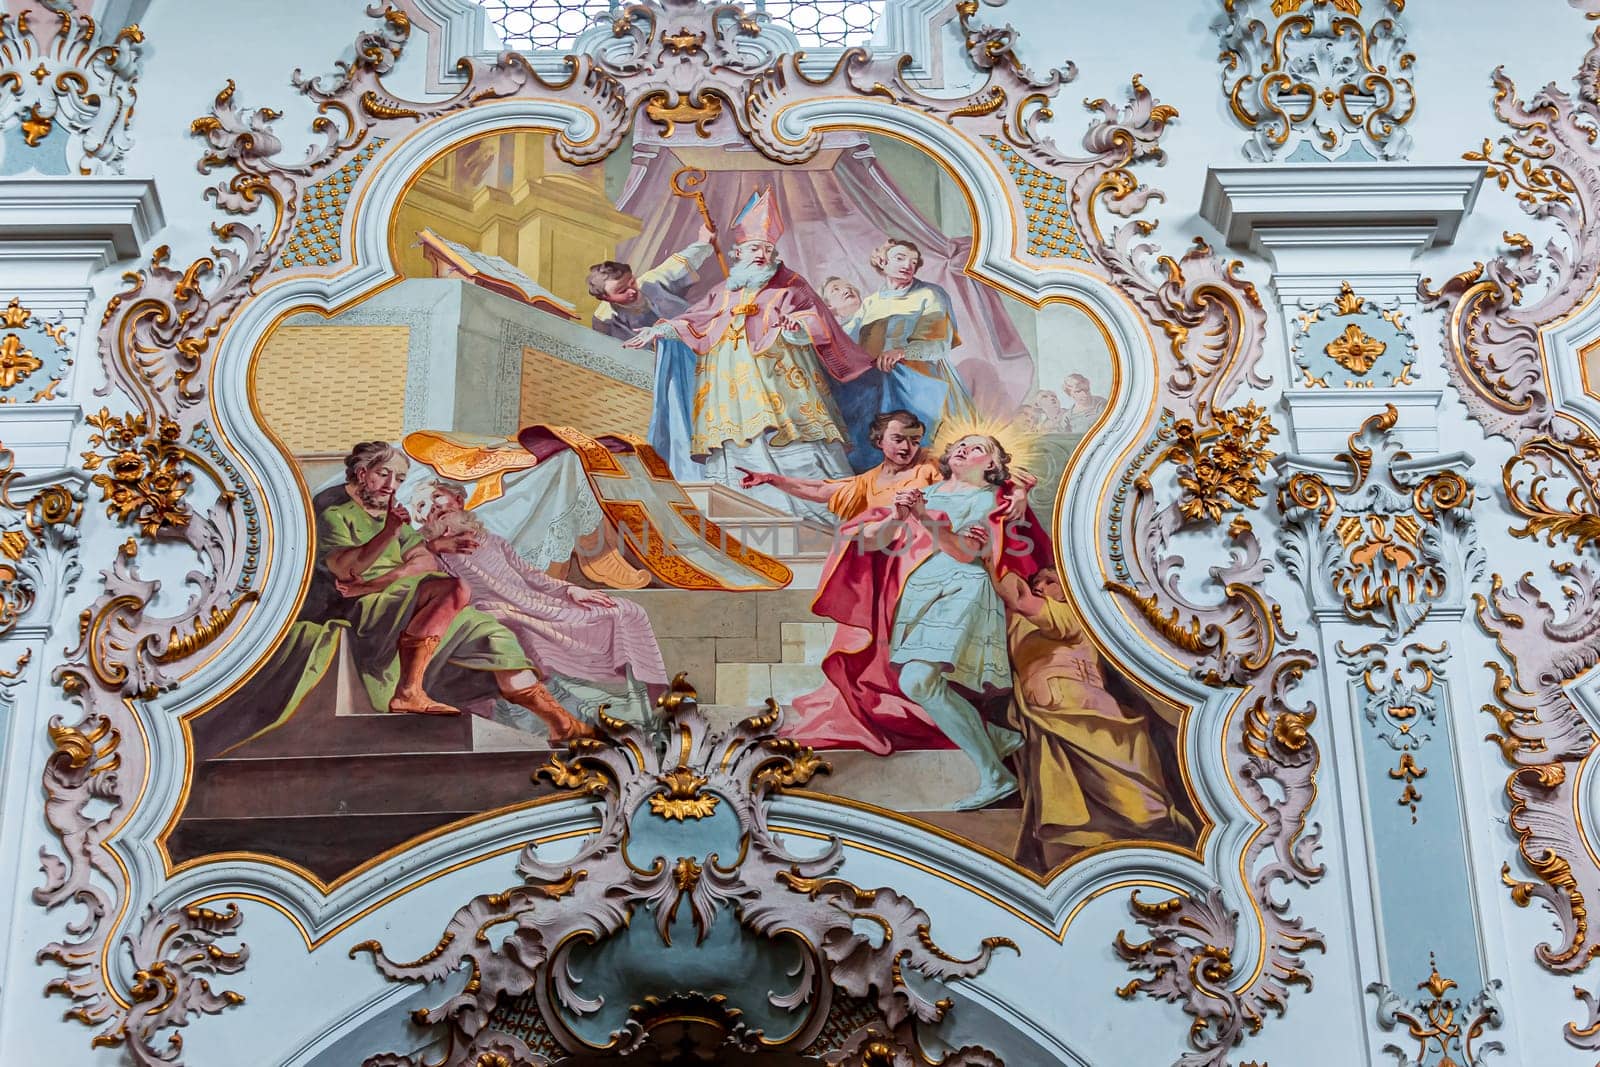 ROTTENBUCH, BAVARIA, GERMANY, JUNE 02, 2022 : interiors, frescoes and architectural decors of  Rottenbuch abbey basilica, by painter Matthaus Gunther and stuccoist Josef Schmuzer, 18th century